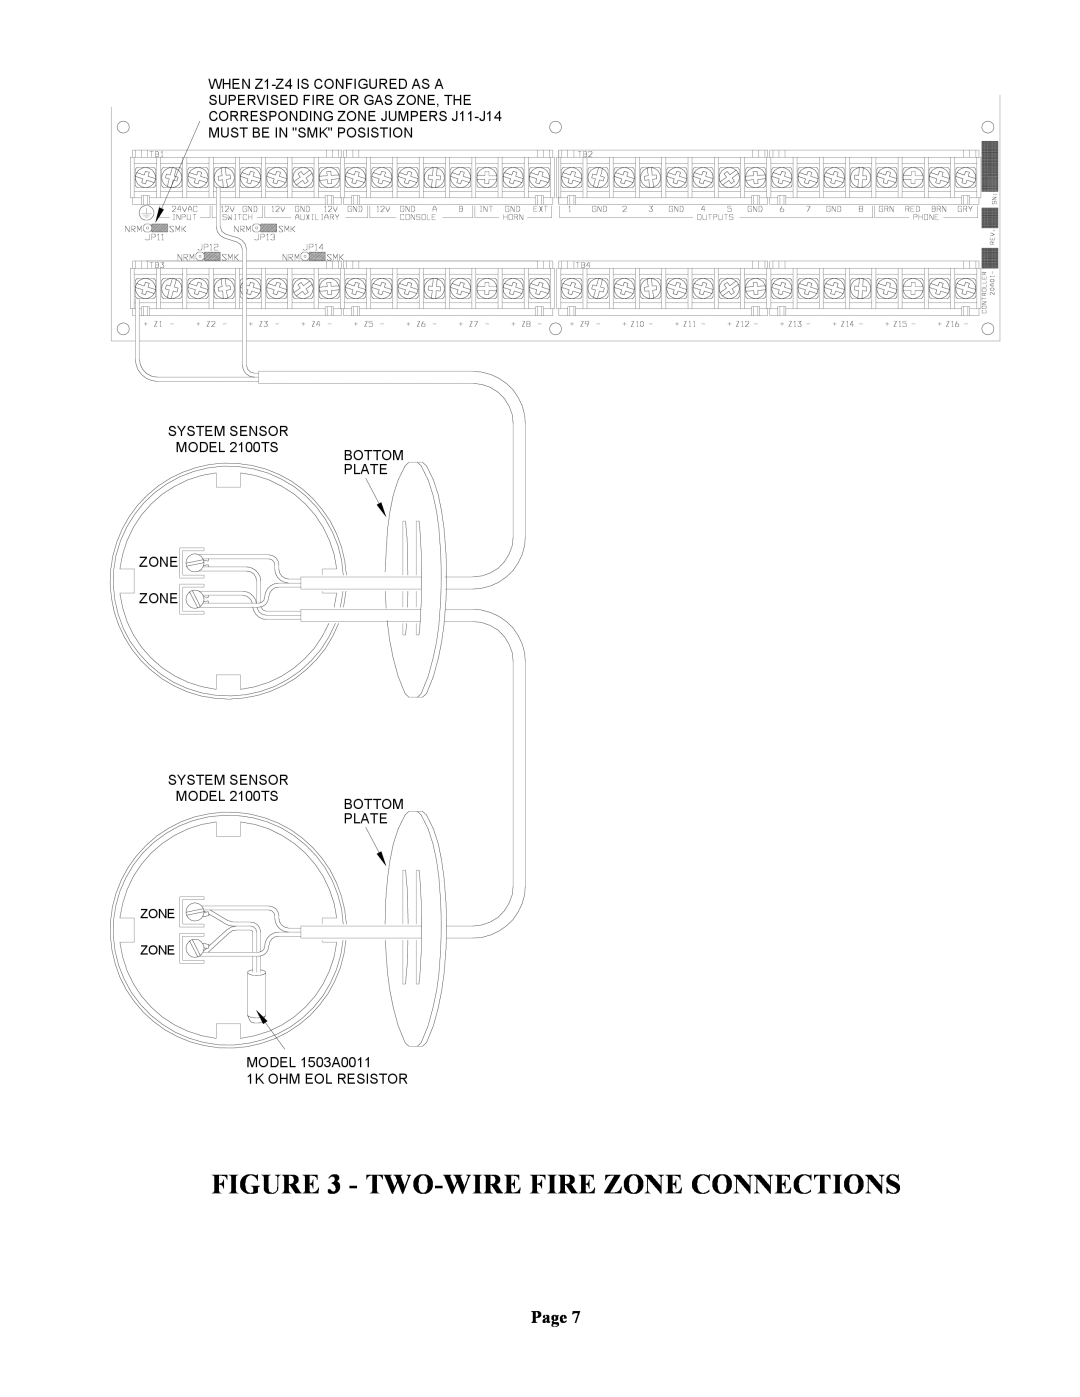 Home Automation 20A00-1 installation manual Two-Wirefire Zone Connections, Page, SYSTEM SENSOR MODEL 2100TS ZONE ZONE 